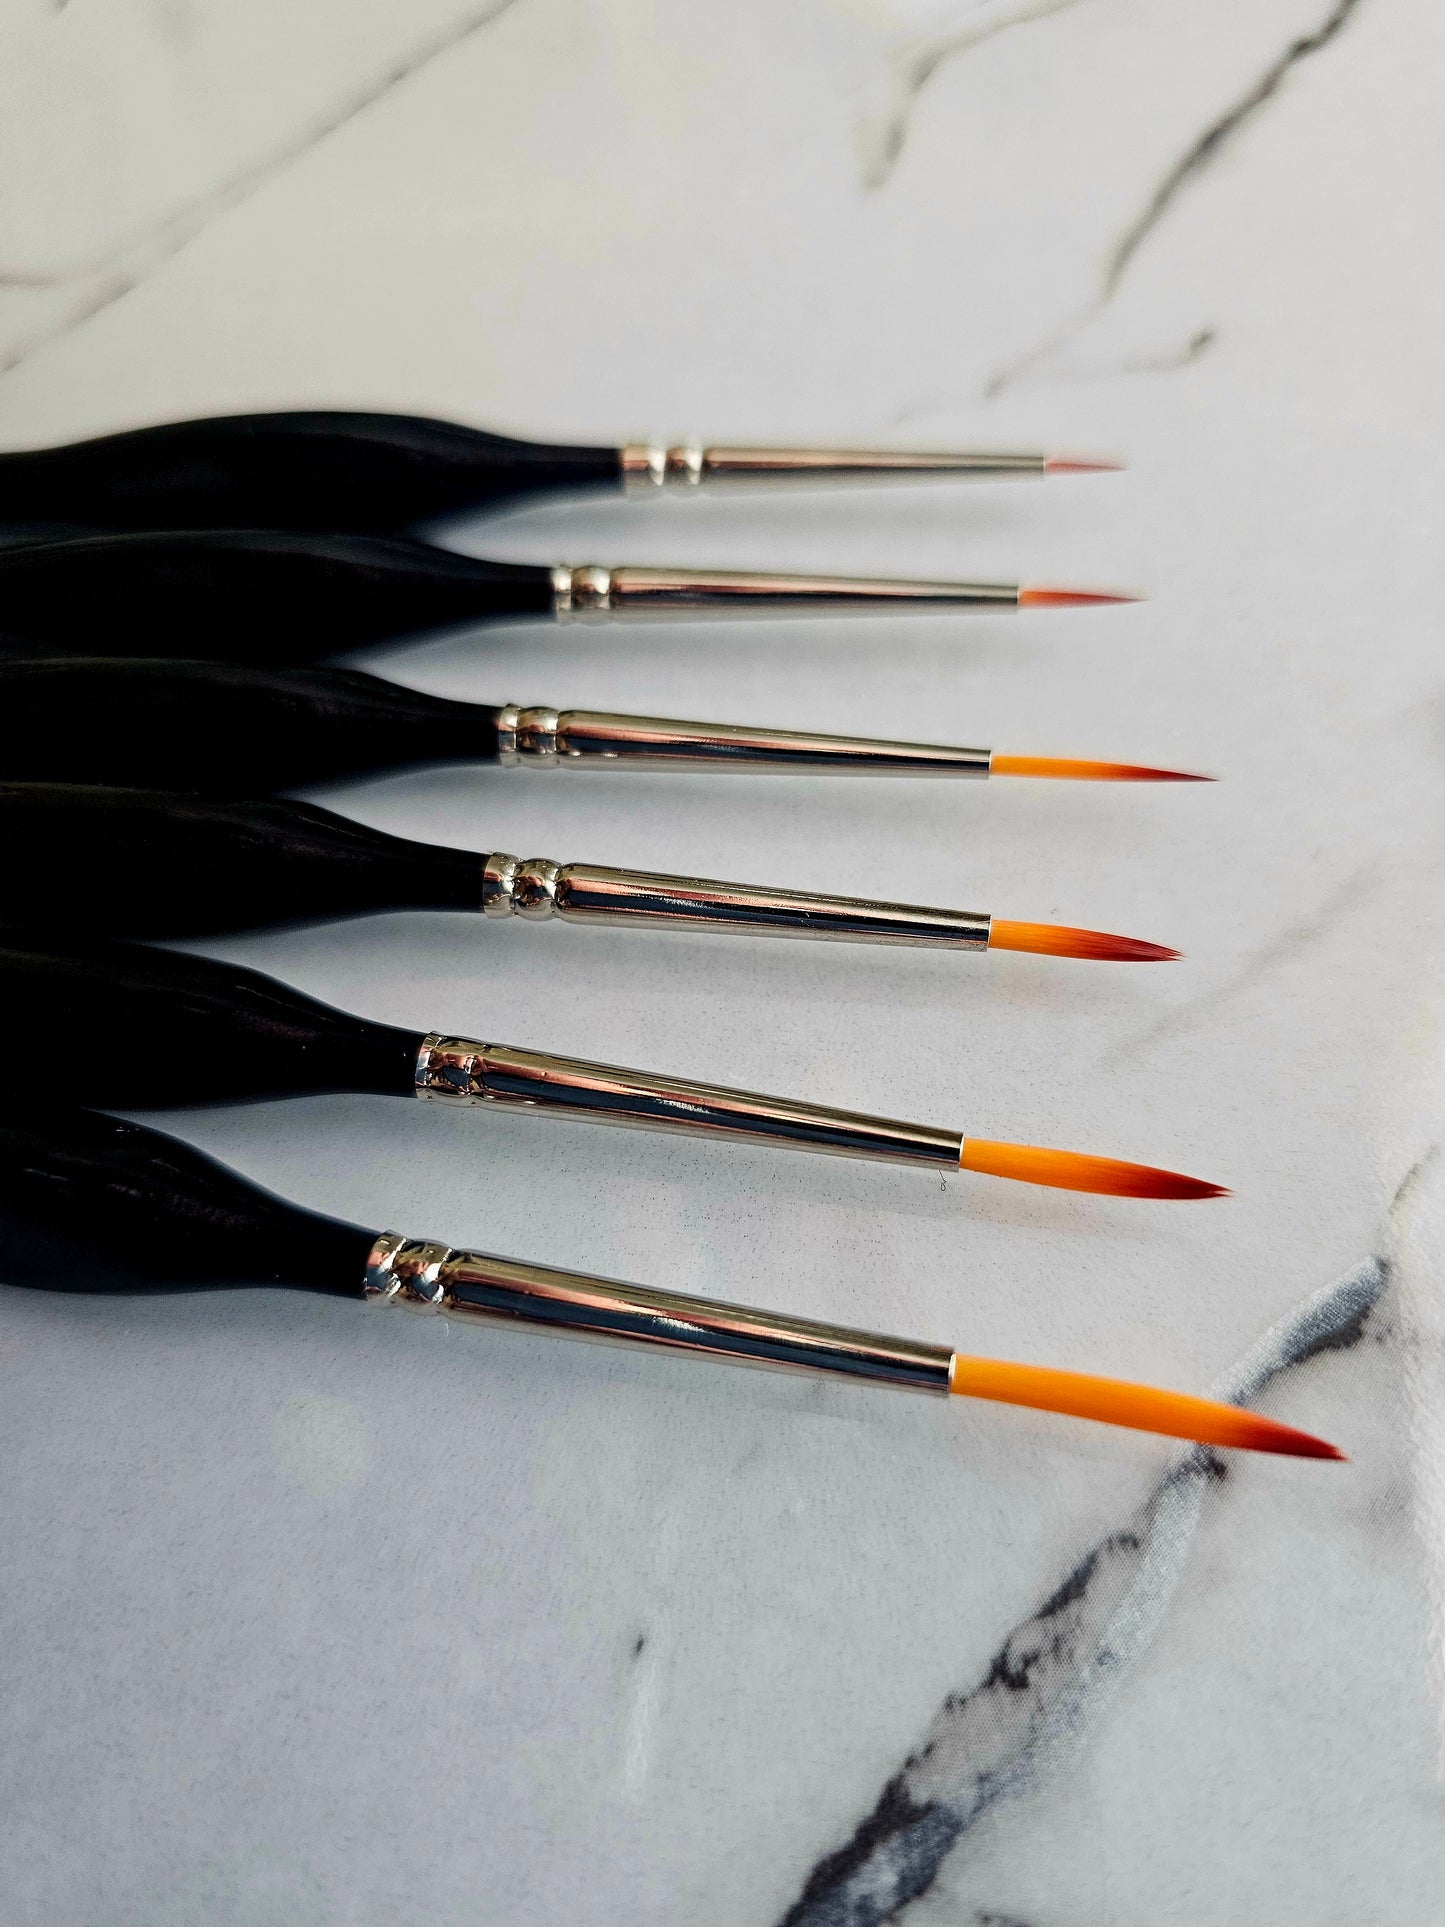 6 pc Nylon fine detail brushes for perfect swooshes